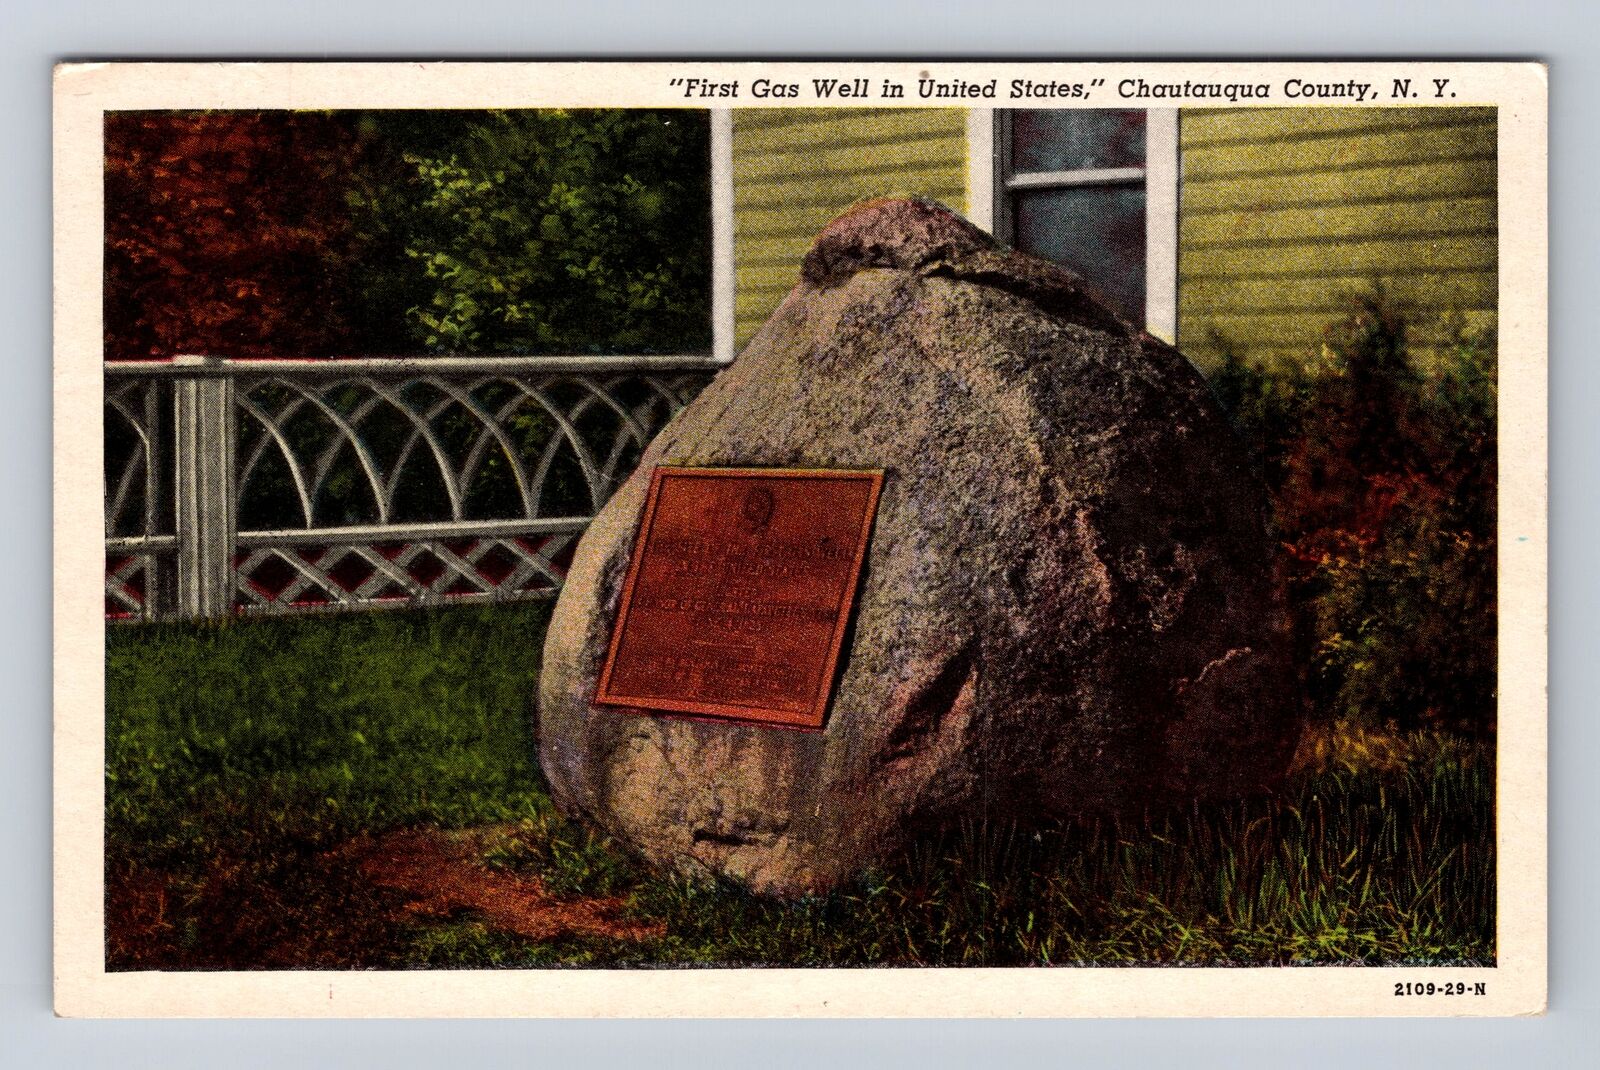 Fredonia NY-New York, Site of First Gas Well in U.S, Vintage c1955 Postcard